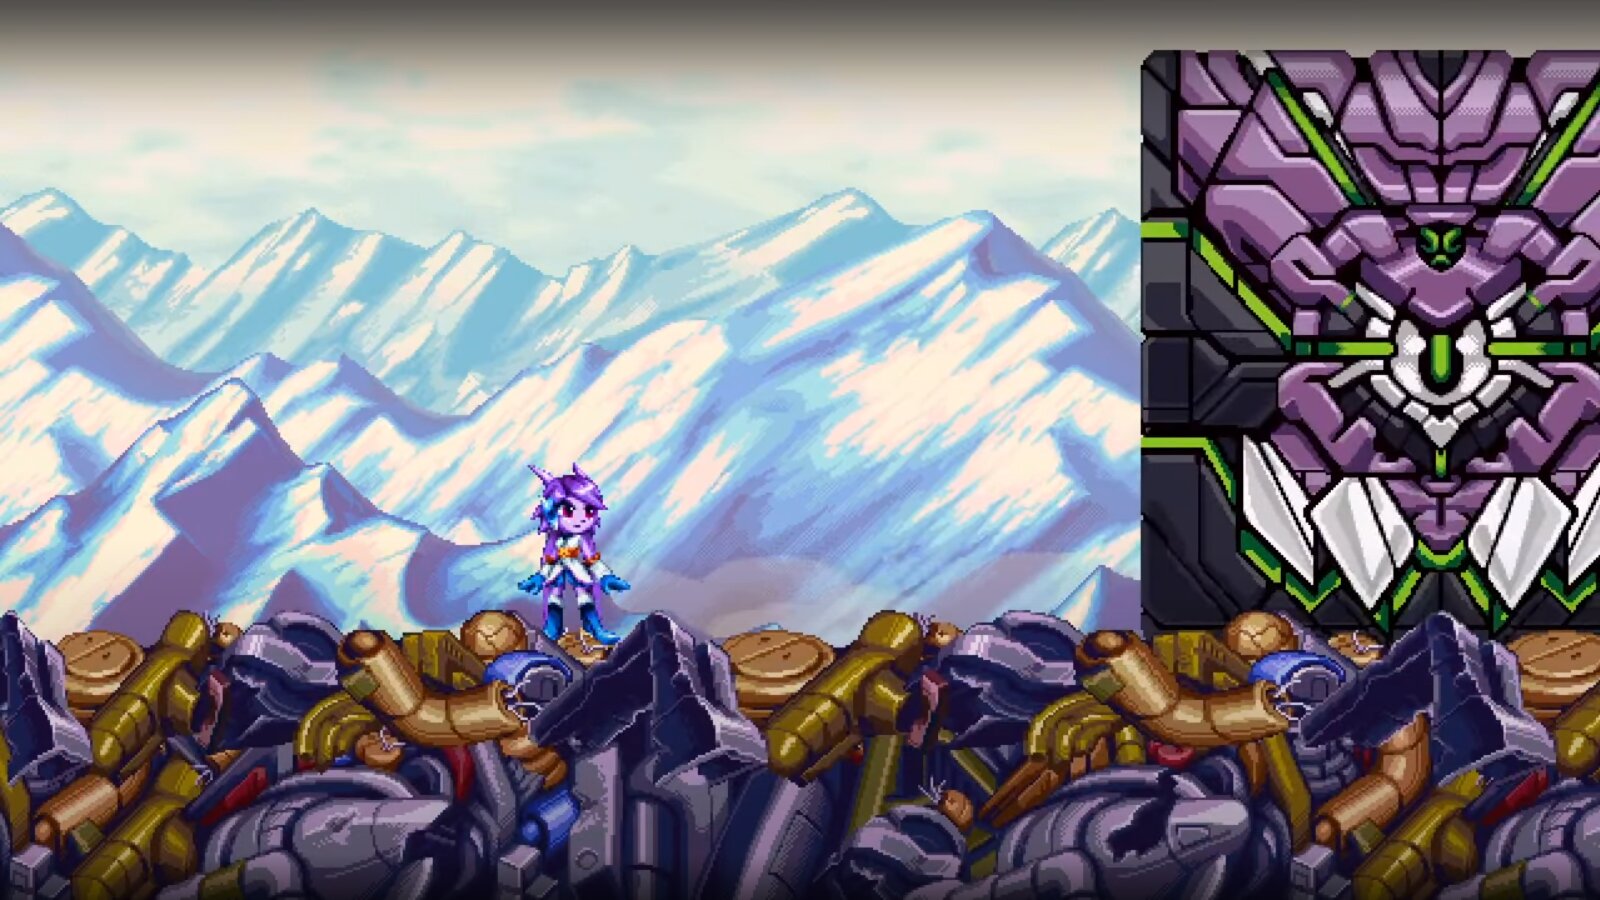 Freedom Planet 2 Review